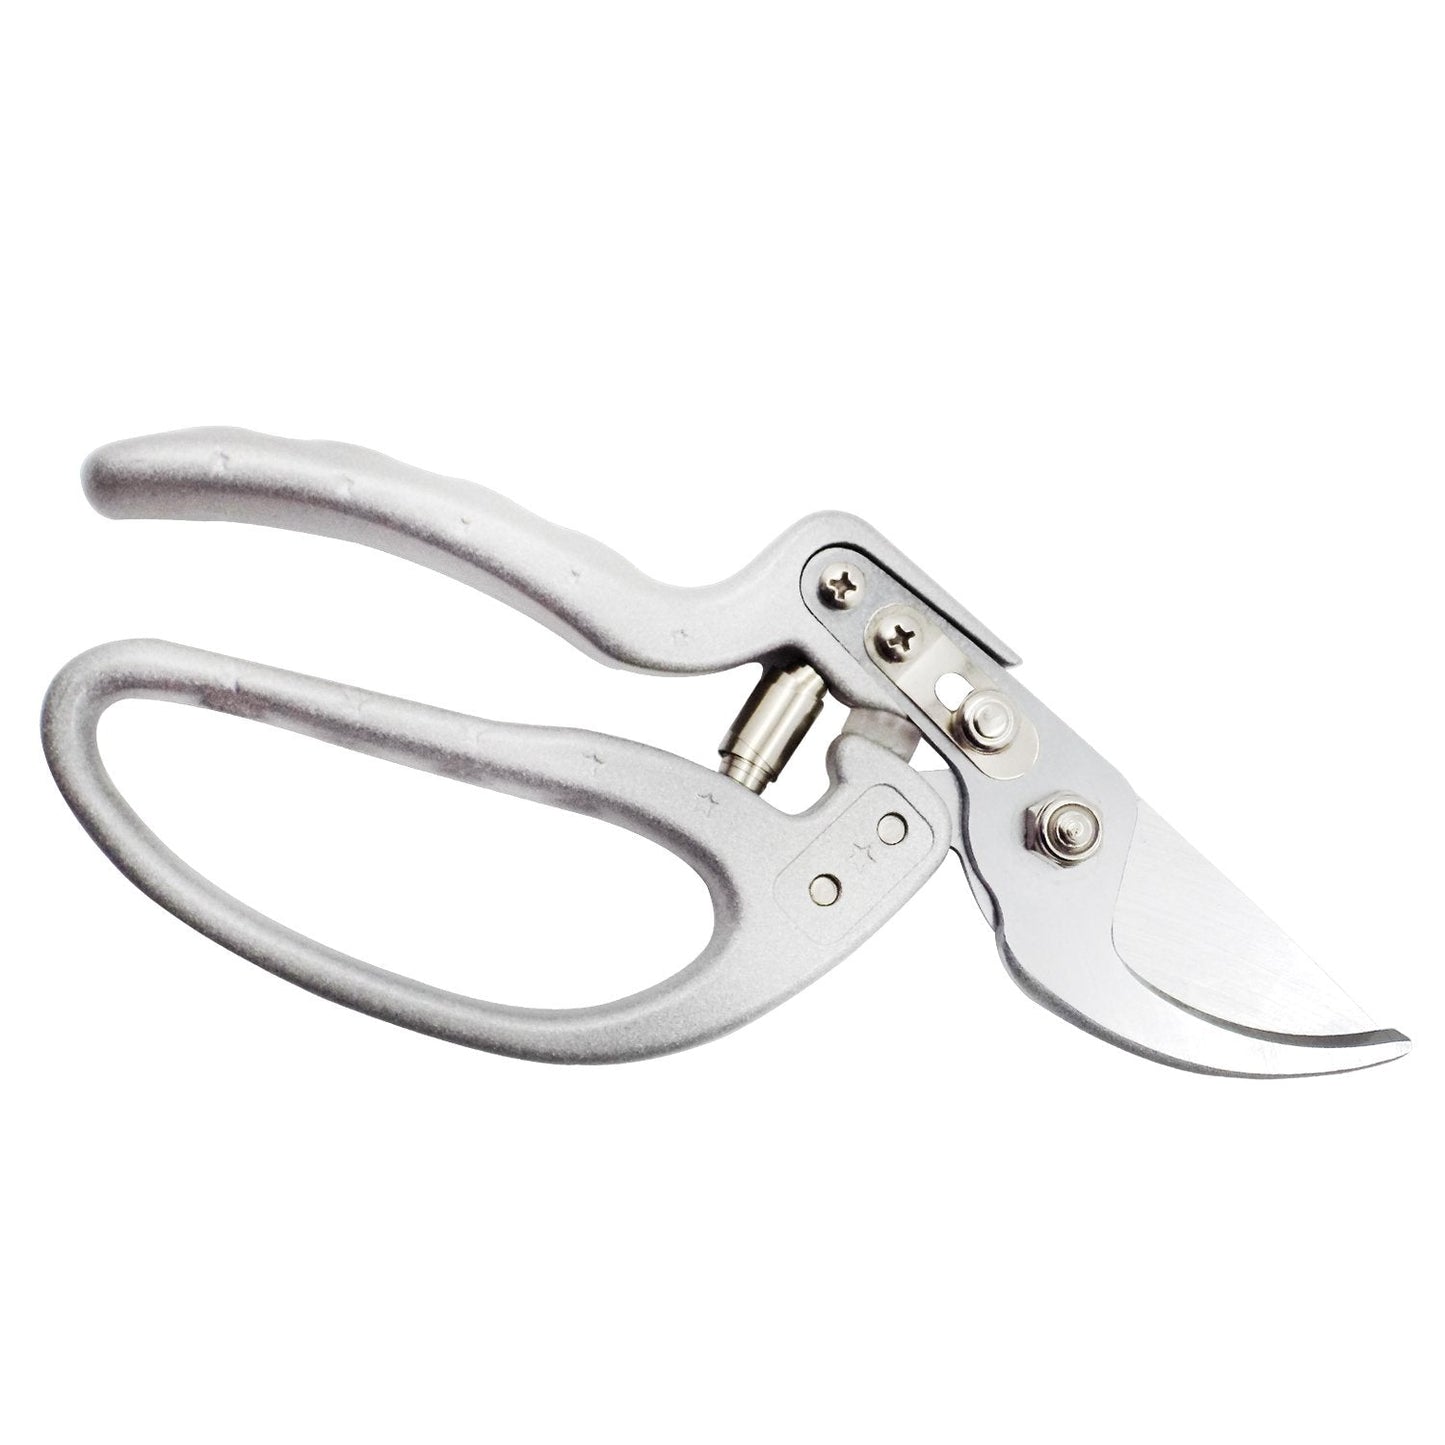 Pruning Shear Cutter for All Purpose Garden Use